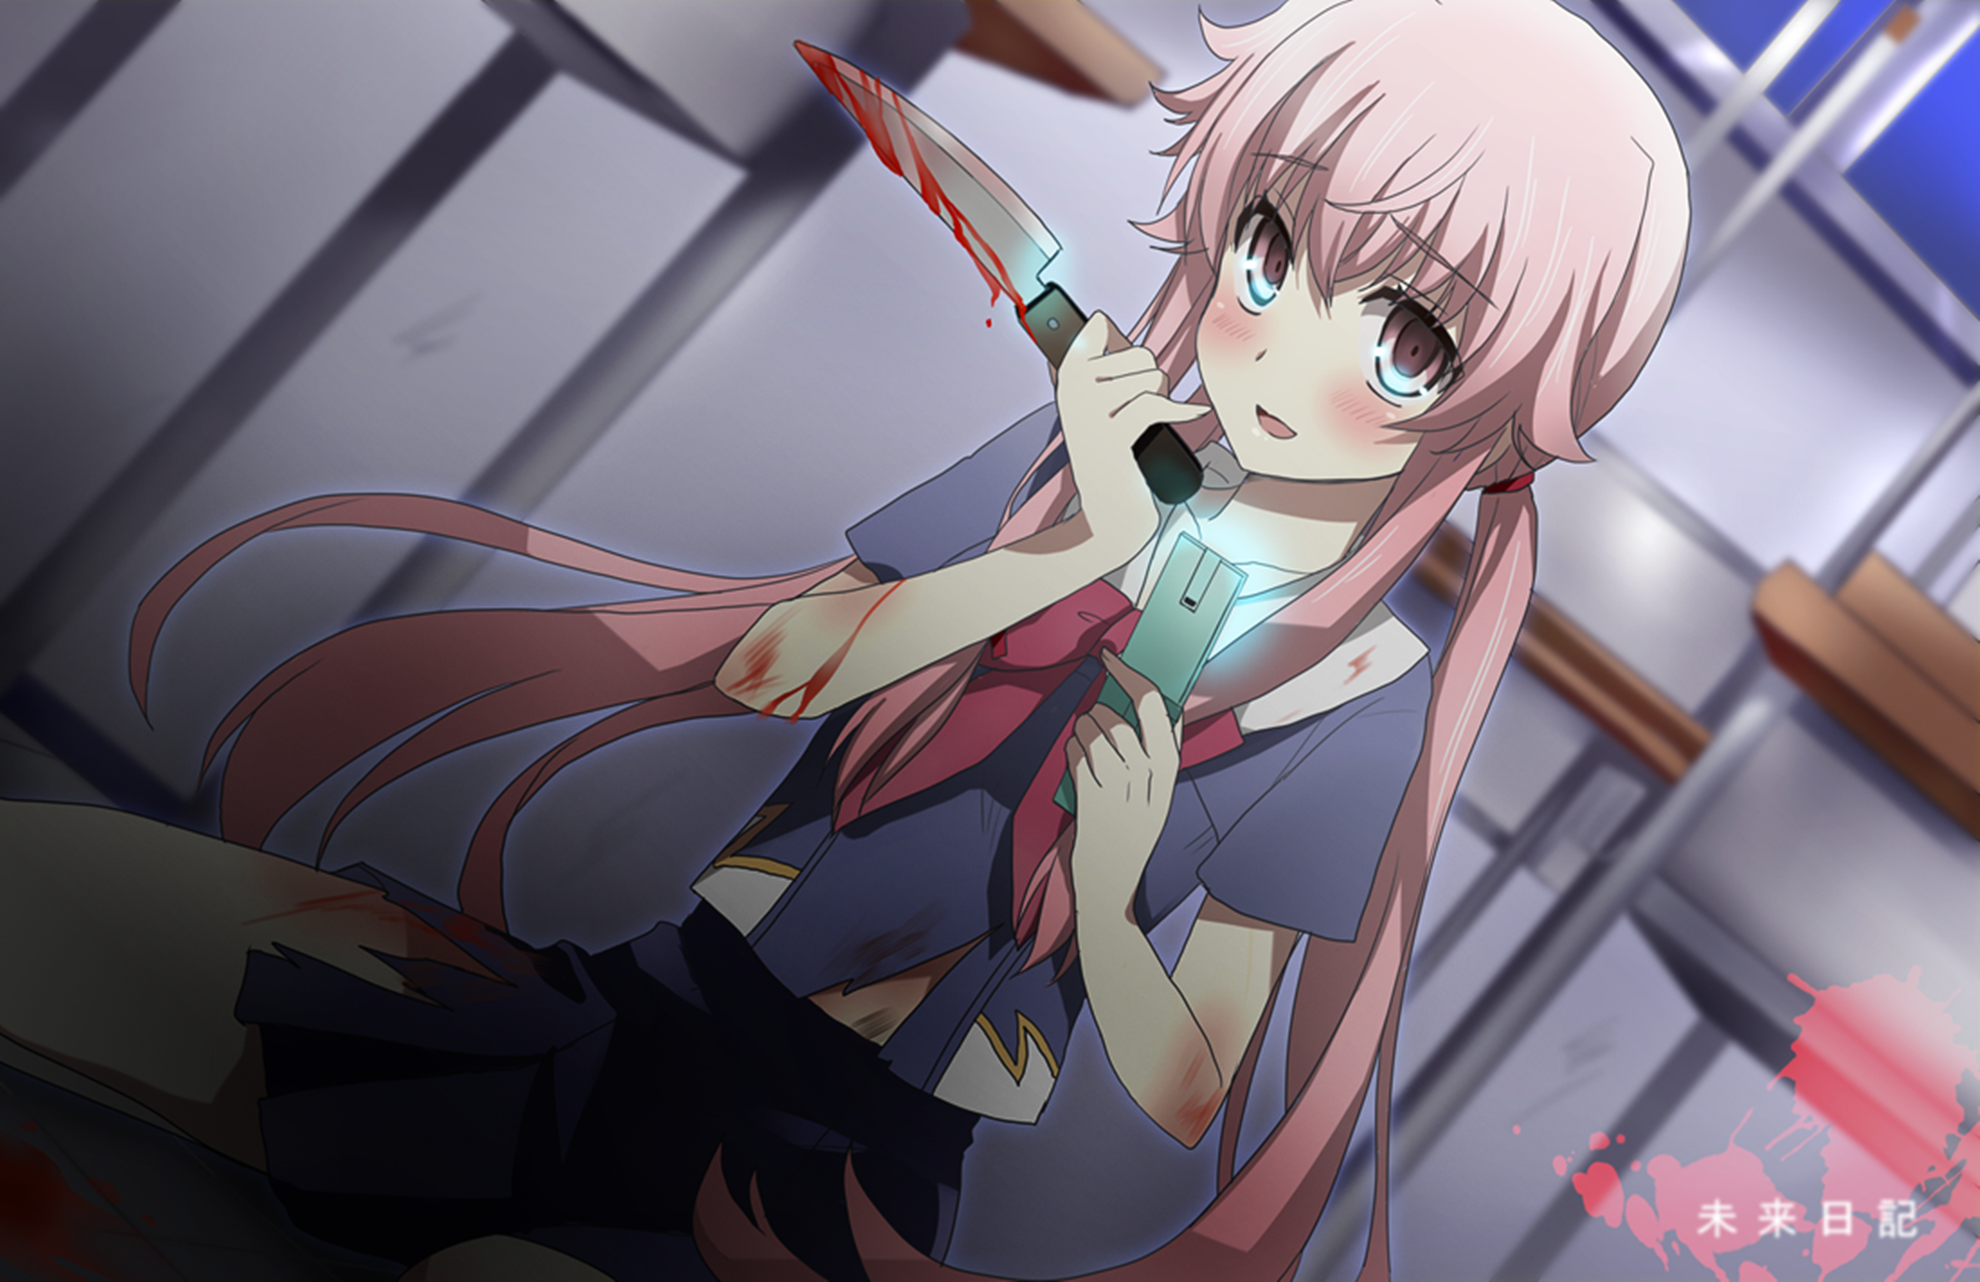 Cool Anime Girl With Knife